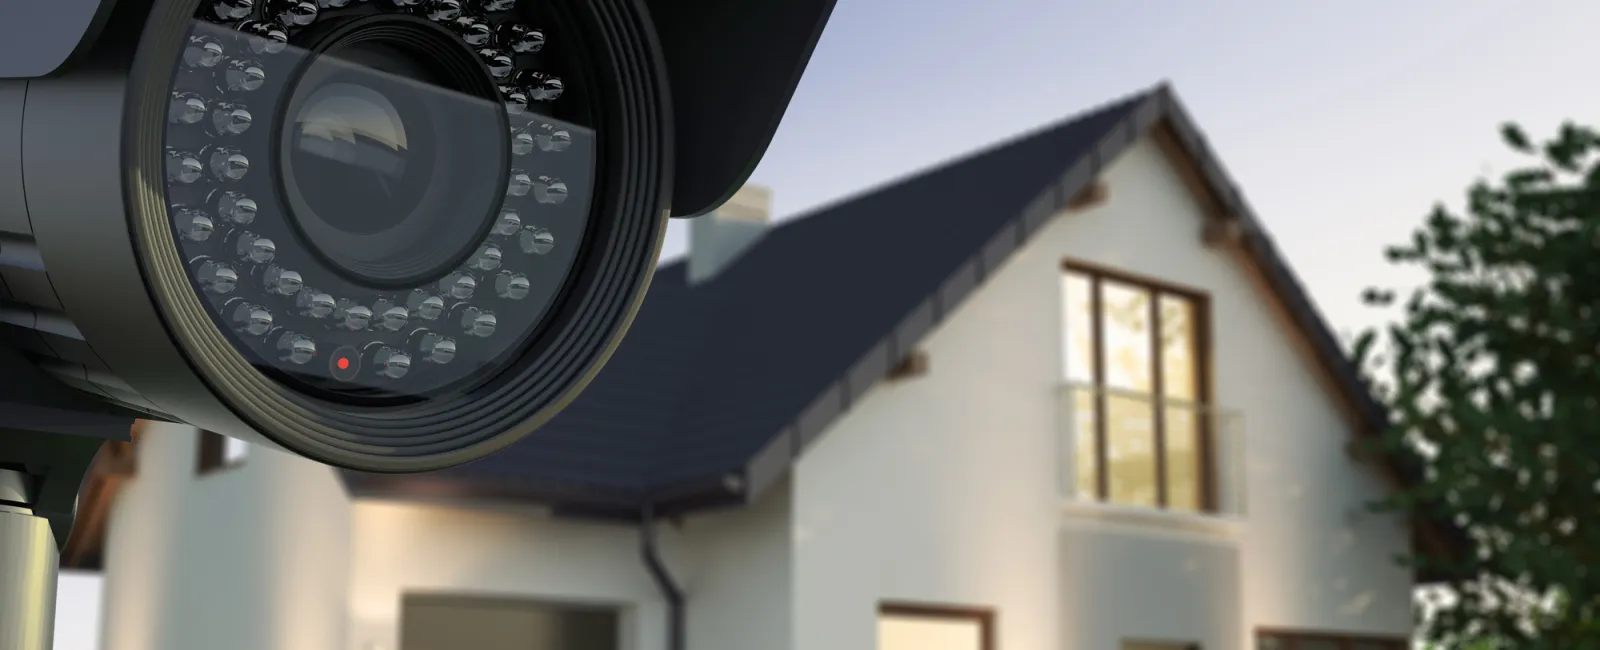 Do You Have an Illegal Residential Security Camera Setup? Georgia's State Legal Code Weighs In